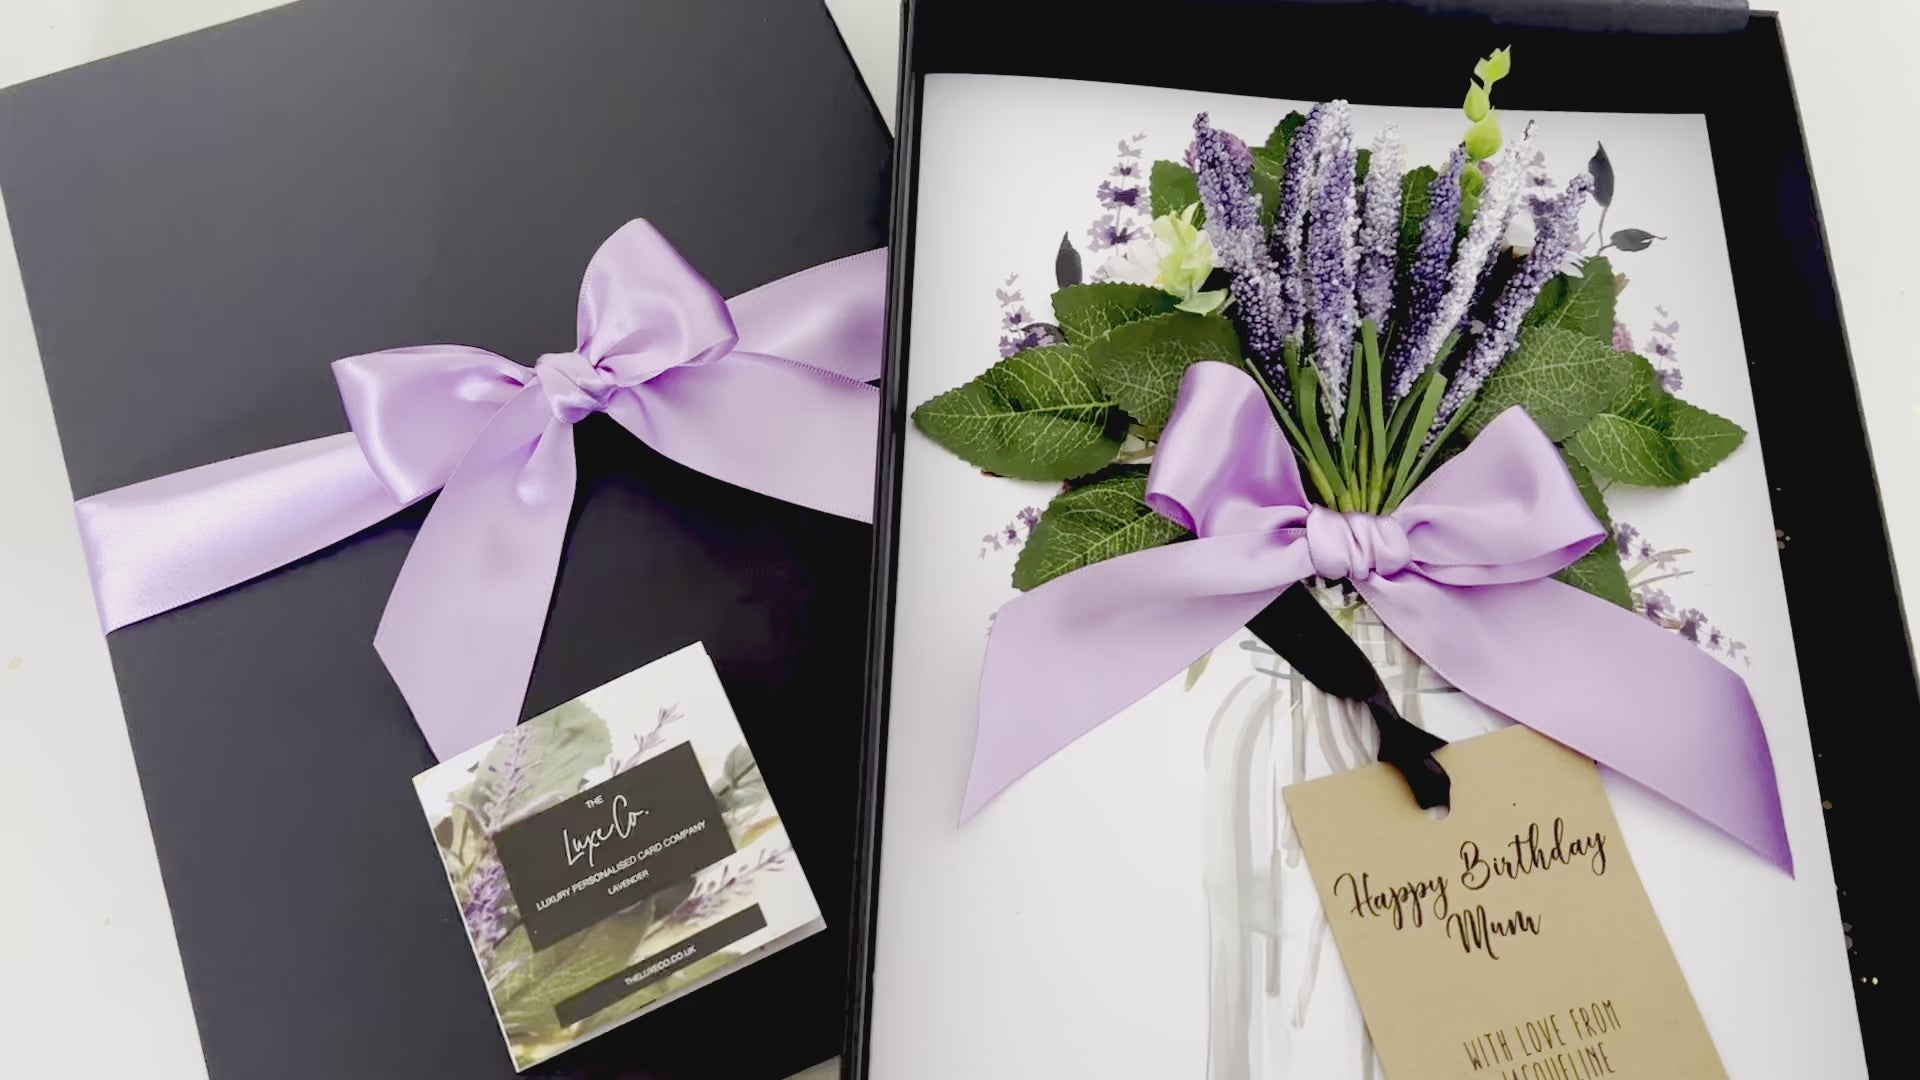 Showcase of the Bloom Lavender Scented Card Design